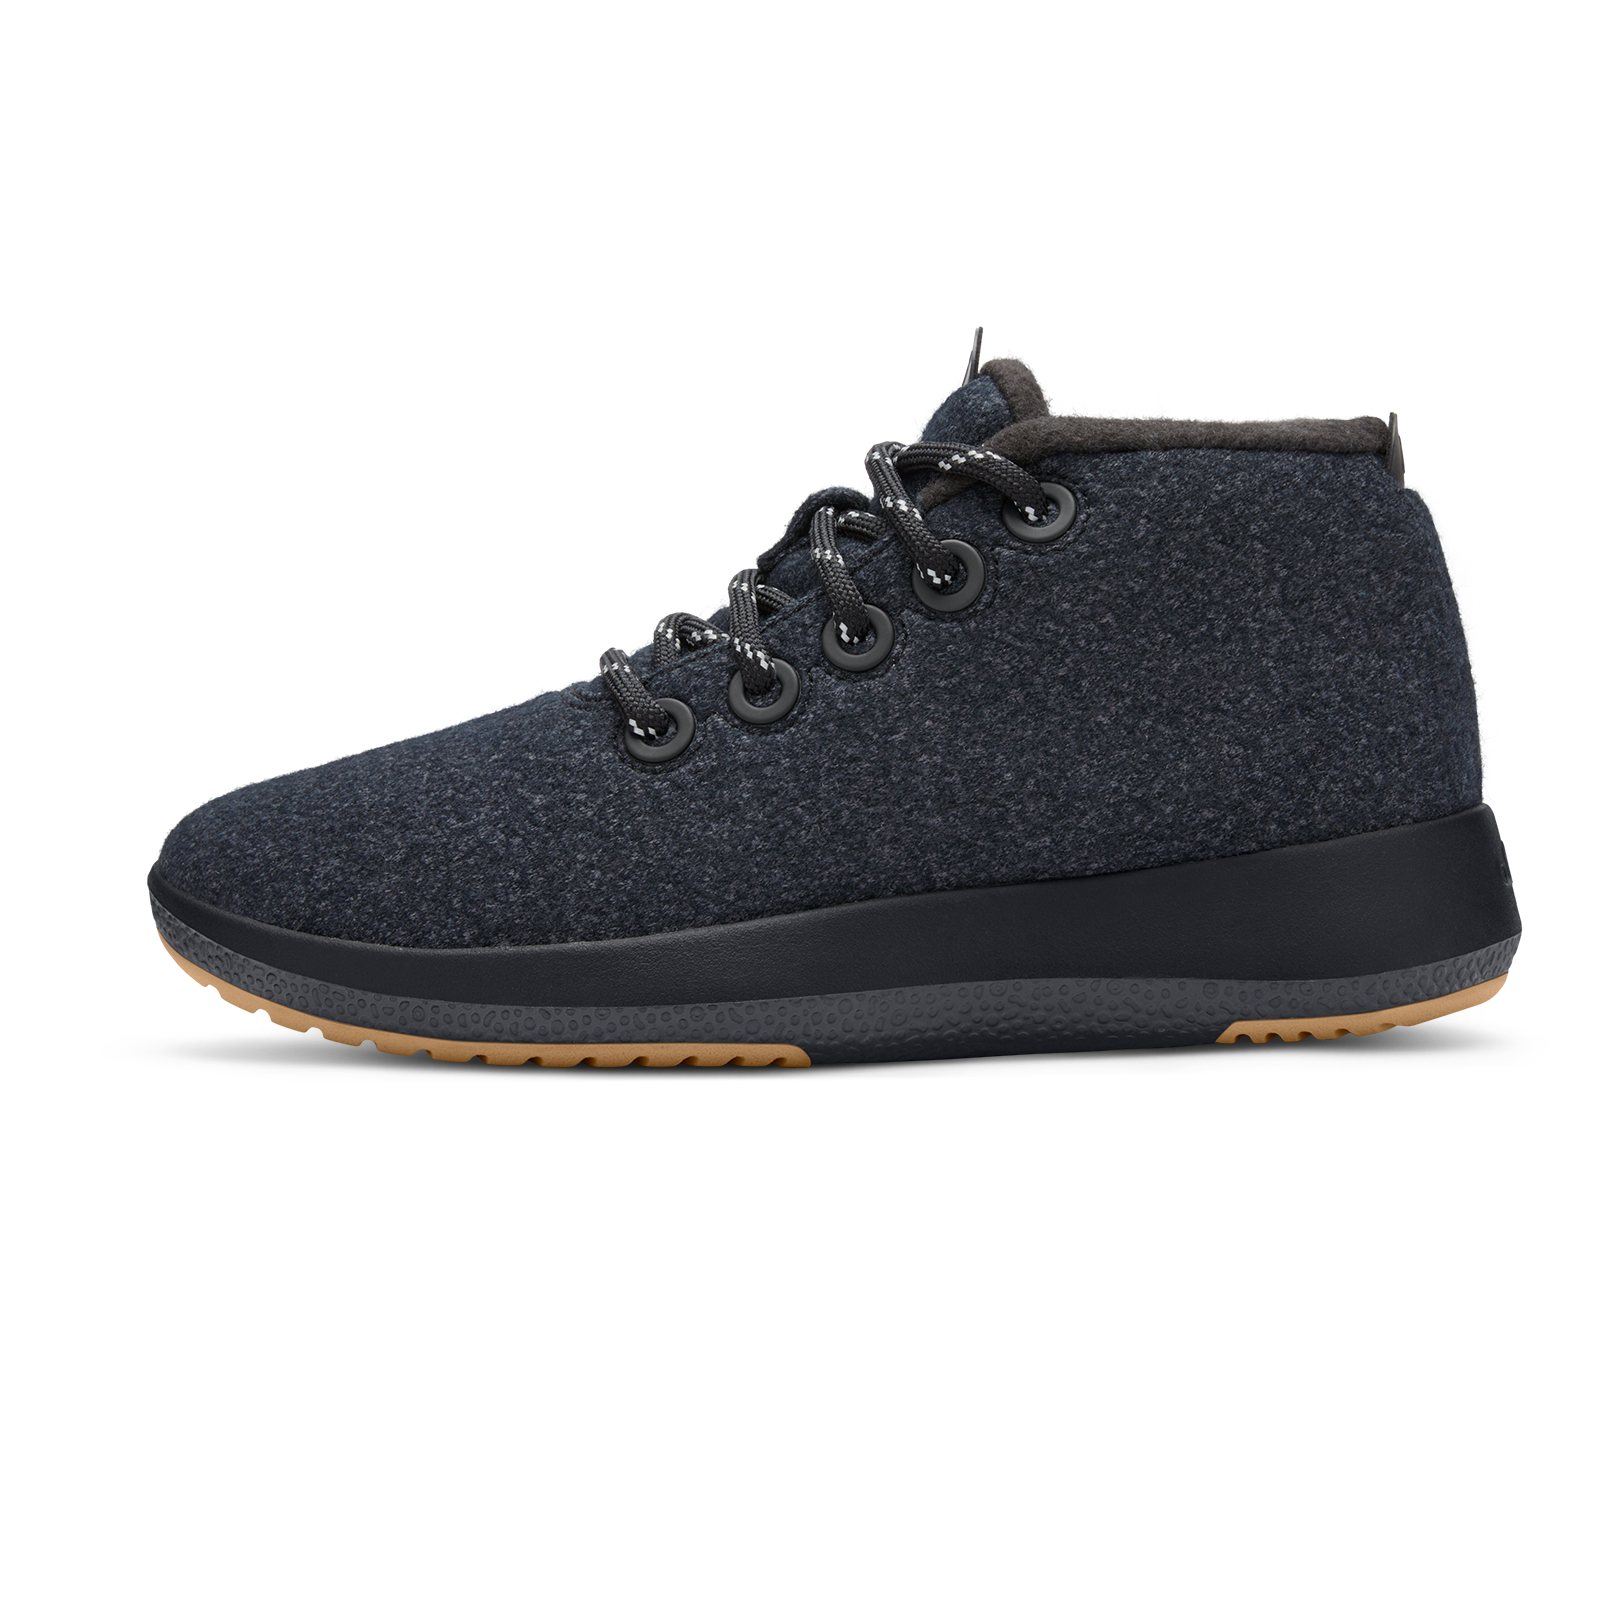 Women's Wool Runner-up Mizzles - Natural Black (Natural White Sole)